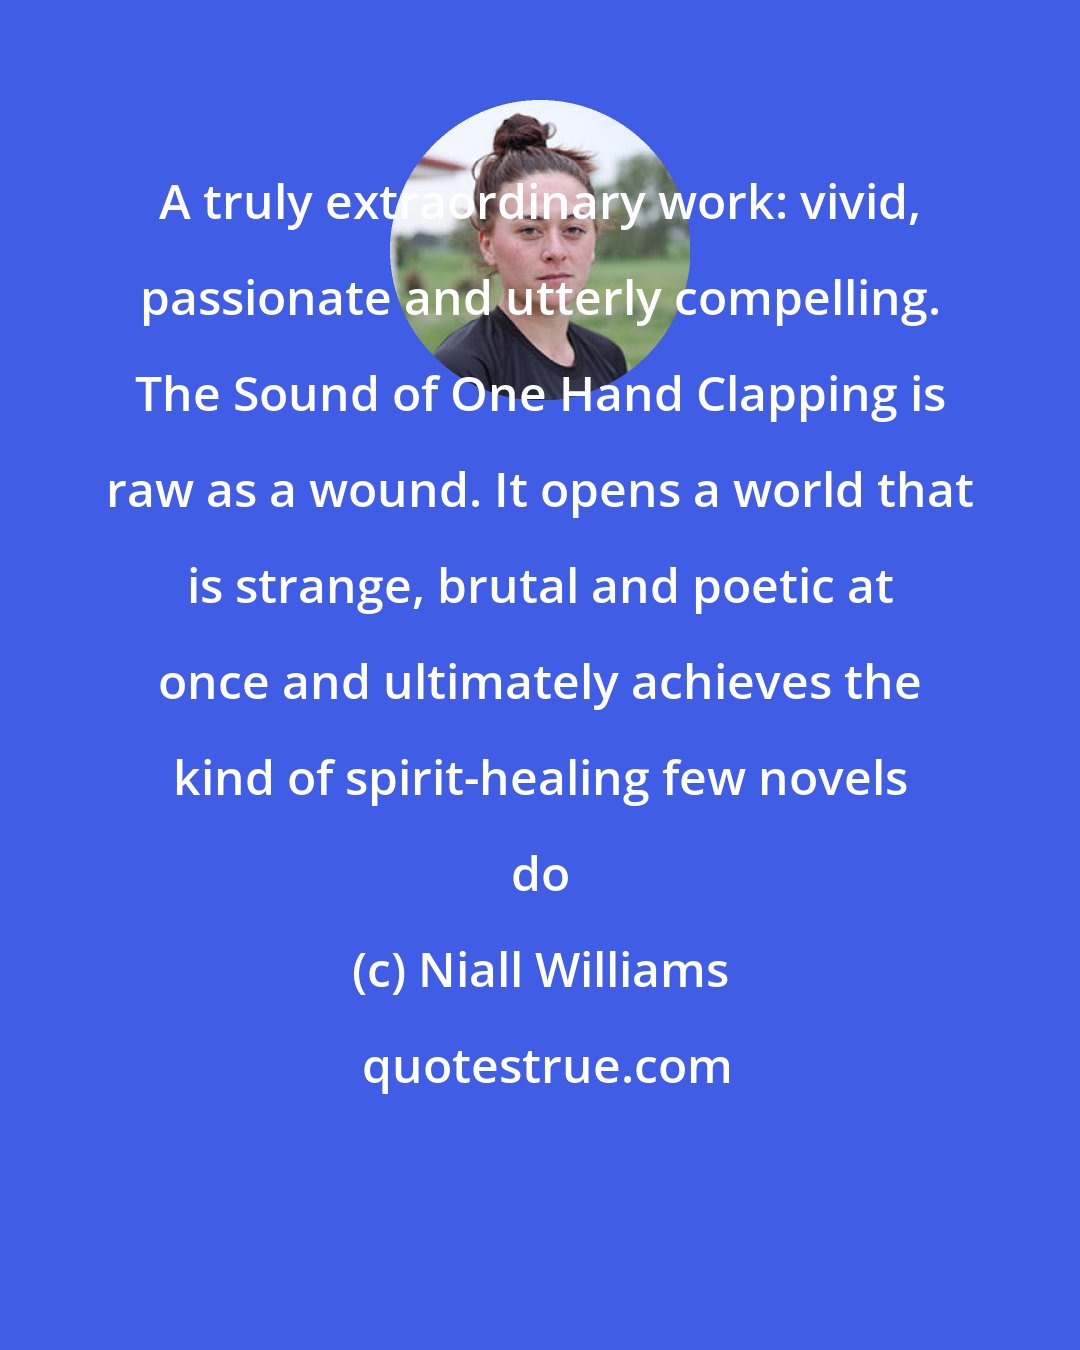 Niall Williams: A truly extraordinary work: vivid, passionate and utterly compelling. The Sound of One Hand Clapping is raw as a wound. It opens a world that is strange, brutal and poetic at once and ultimately achieves the kind of spirit-healing few novels do